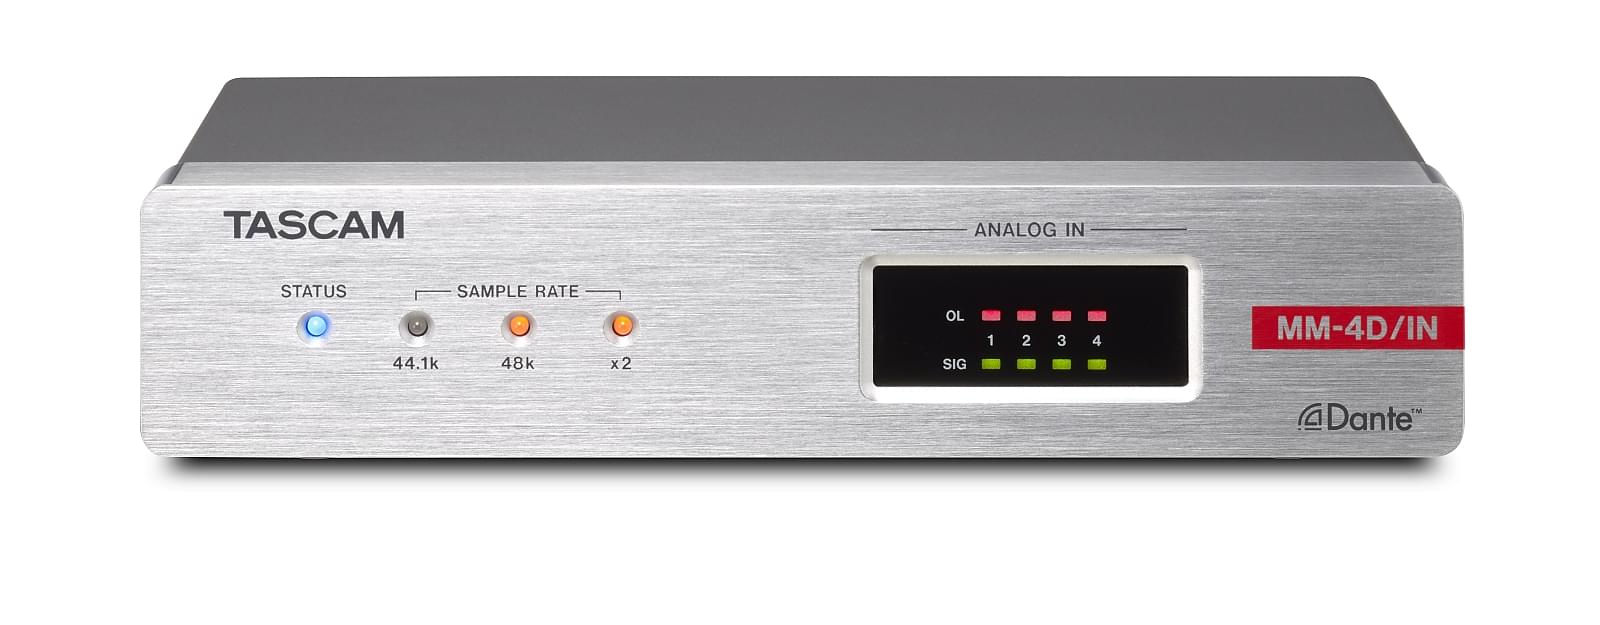 Four-Channel Analogue-Dante Converter With DSP Mixer | Tascam MM-4D/IN